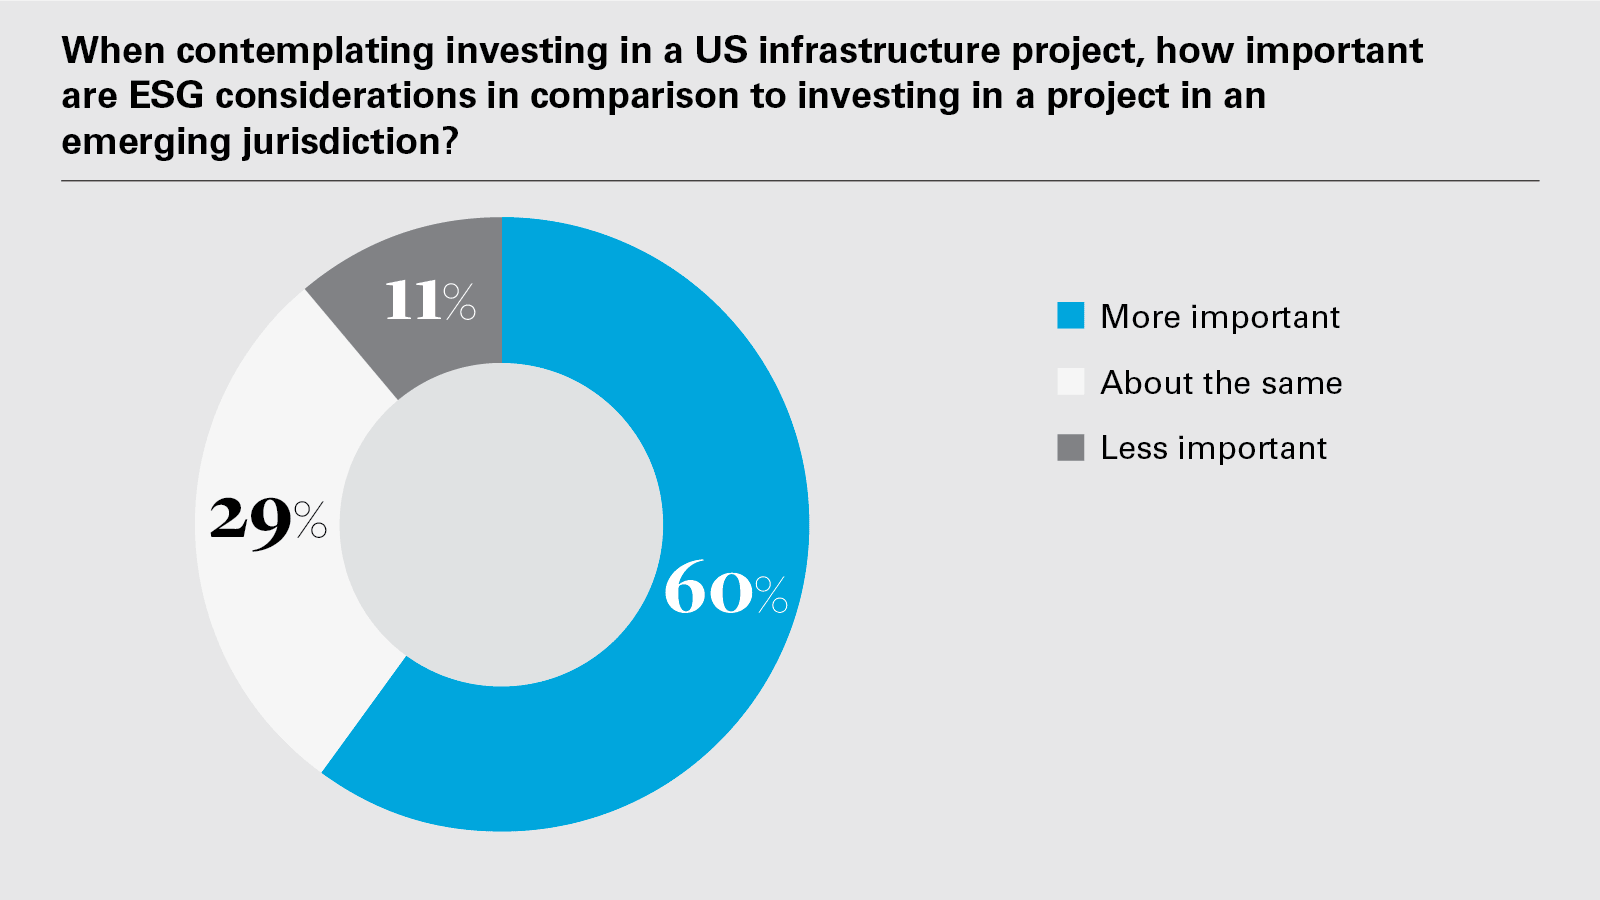 When contemplating investing in a US infrastructure project, how important are ESG considerations in comparison to investing in a project in an emerging jurisdiction?